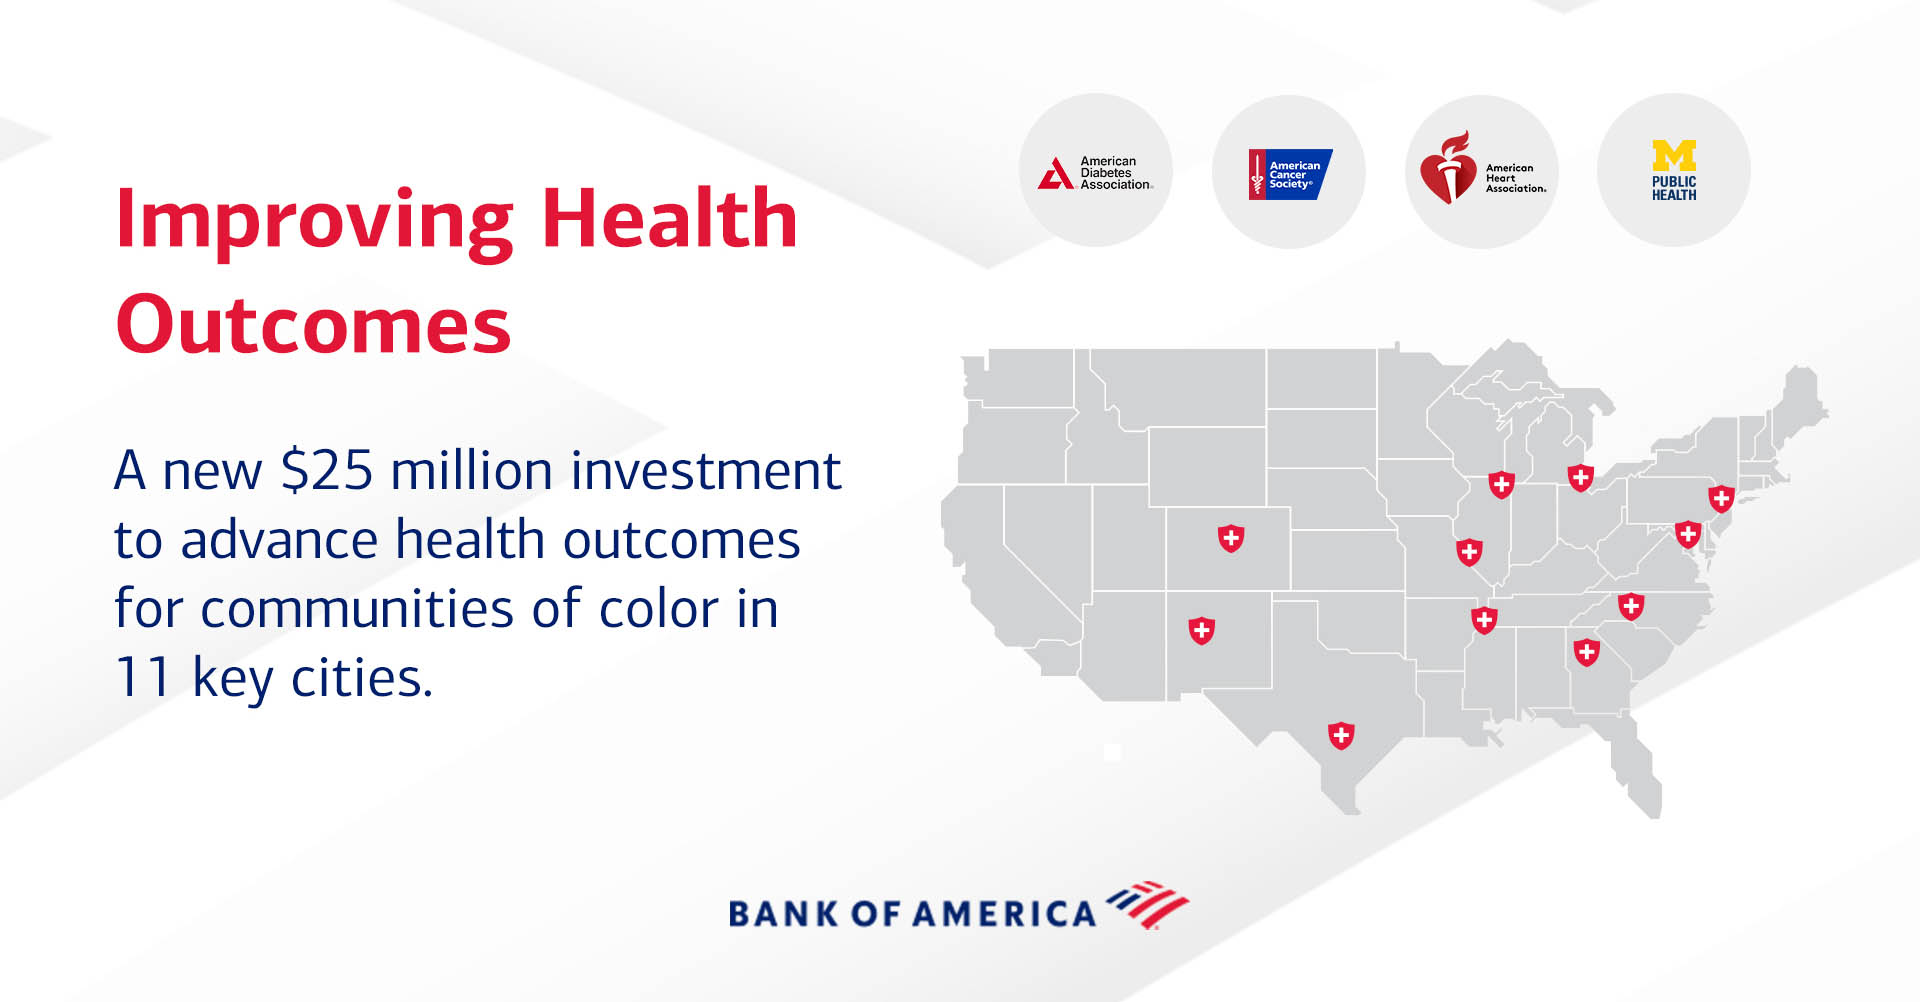  Collaboration Between Leading Health Organizations Aims to Improve Health Outcomes in Communities of Color 